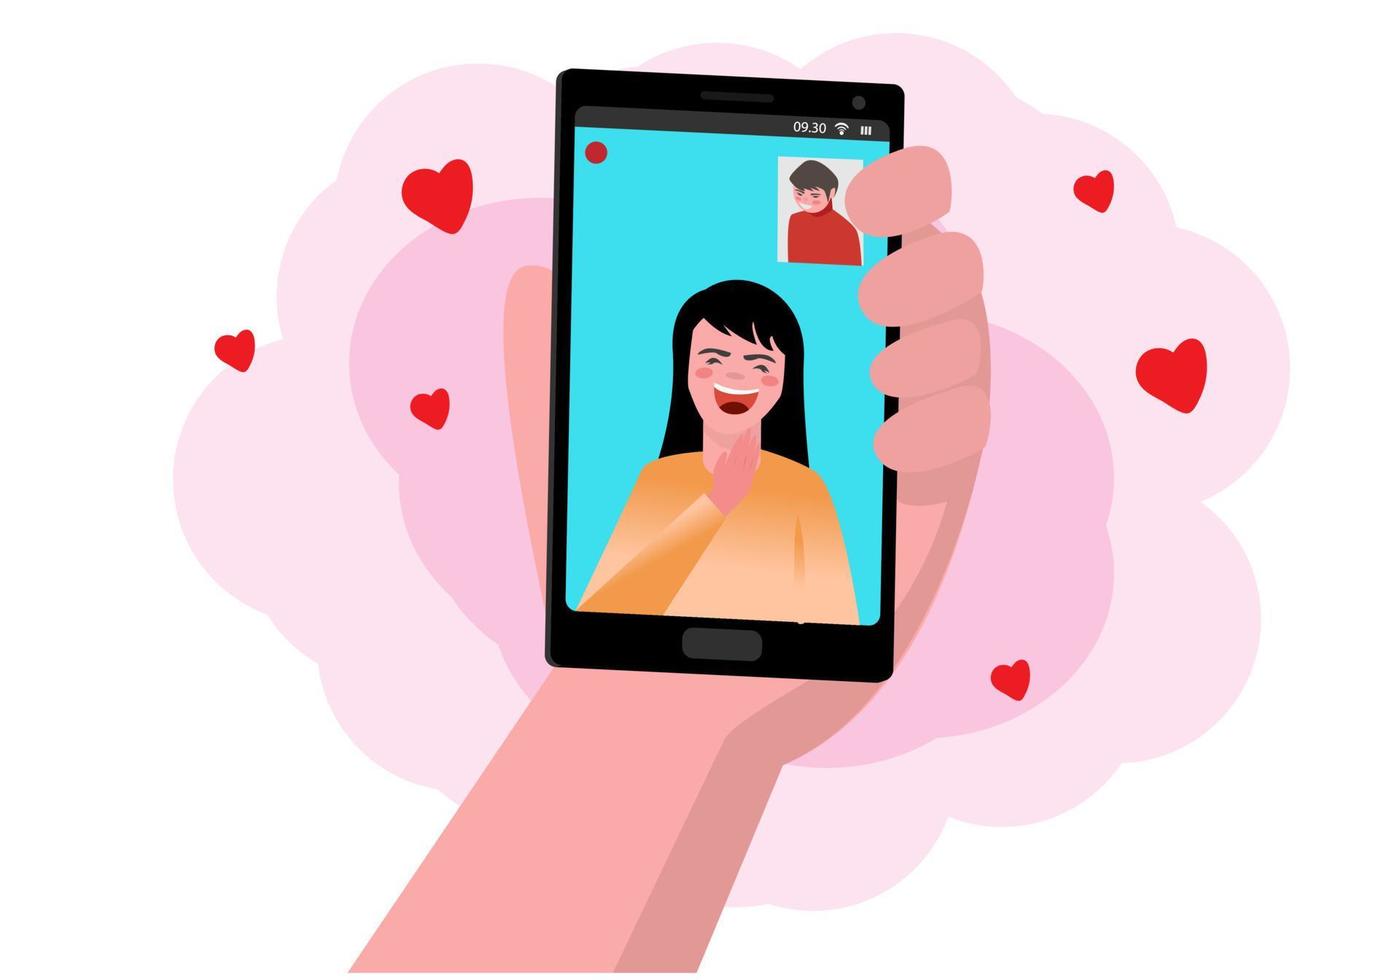 Make video calls with your loved ones through your smartphone. The concept of long-distance love through technology vector